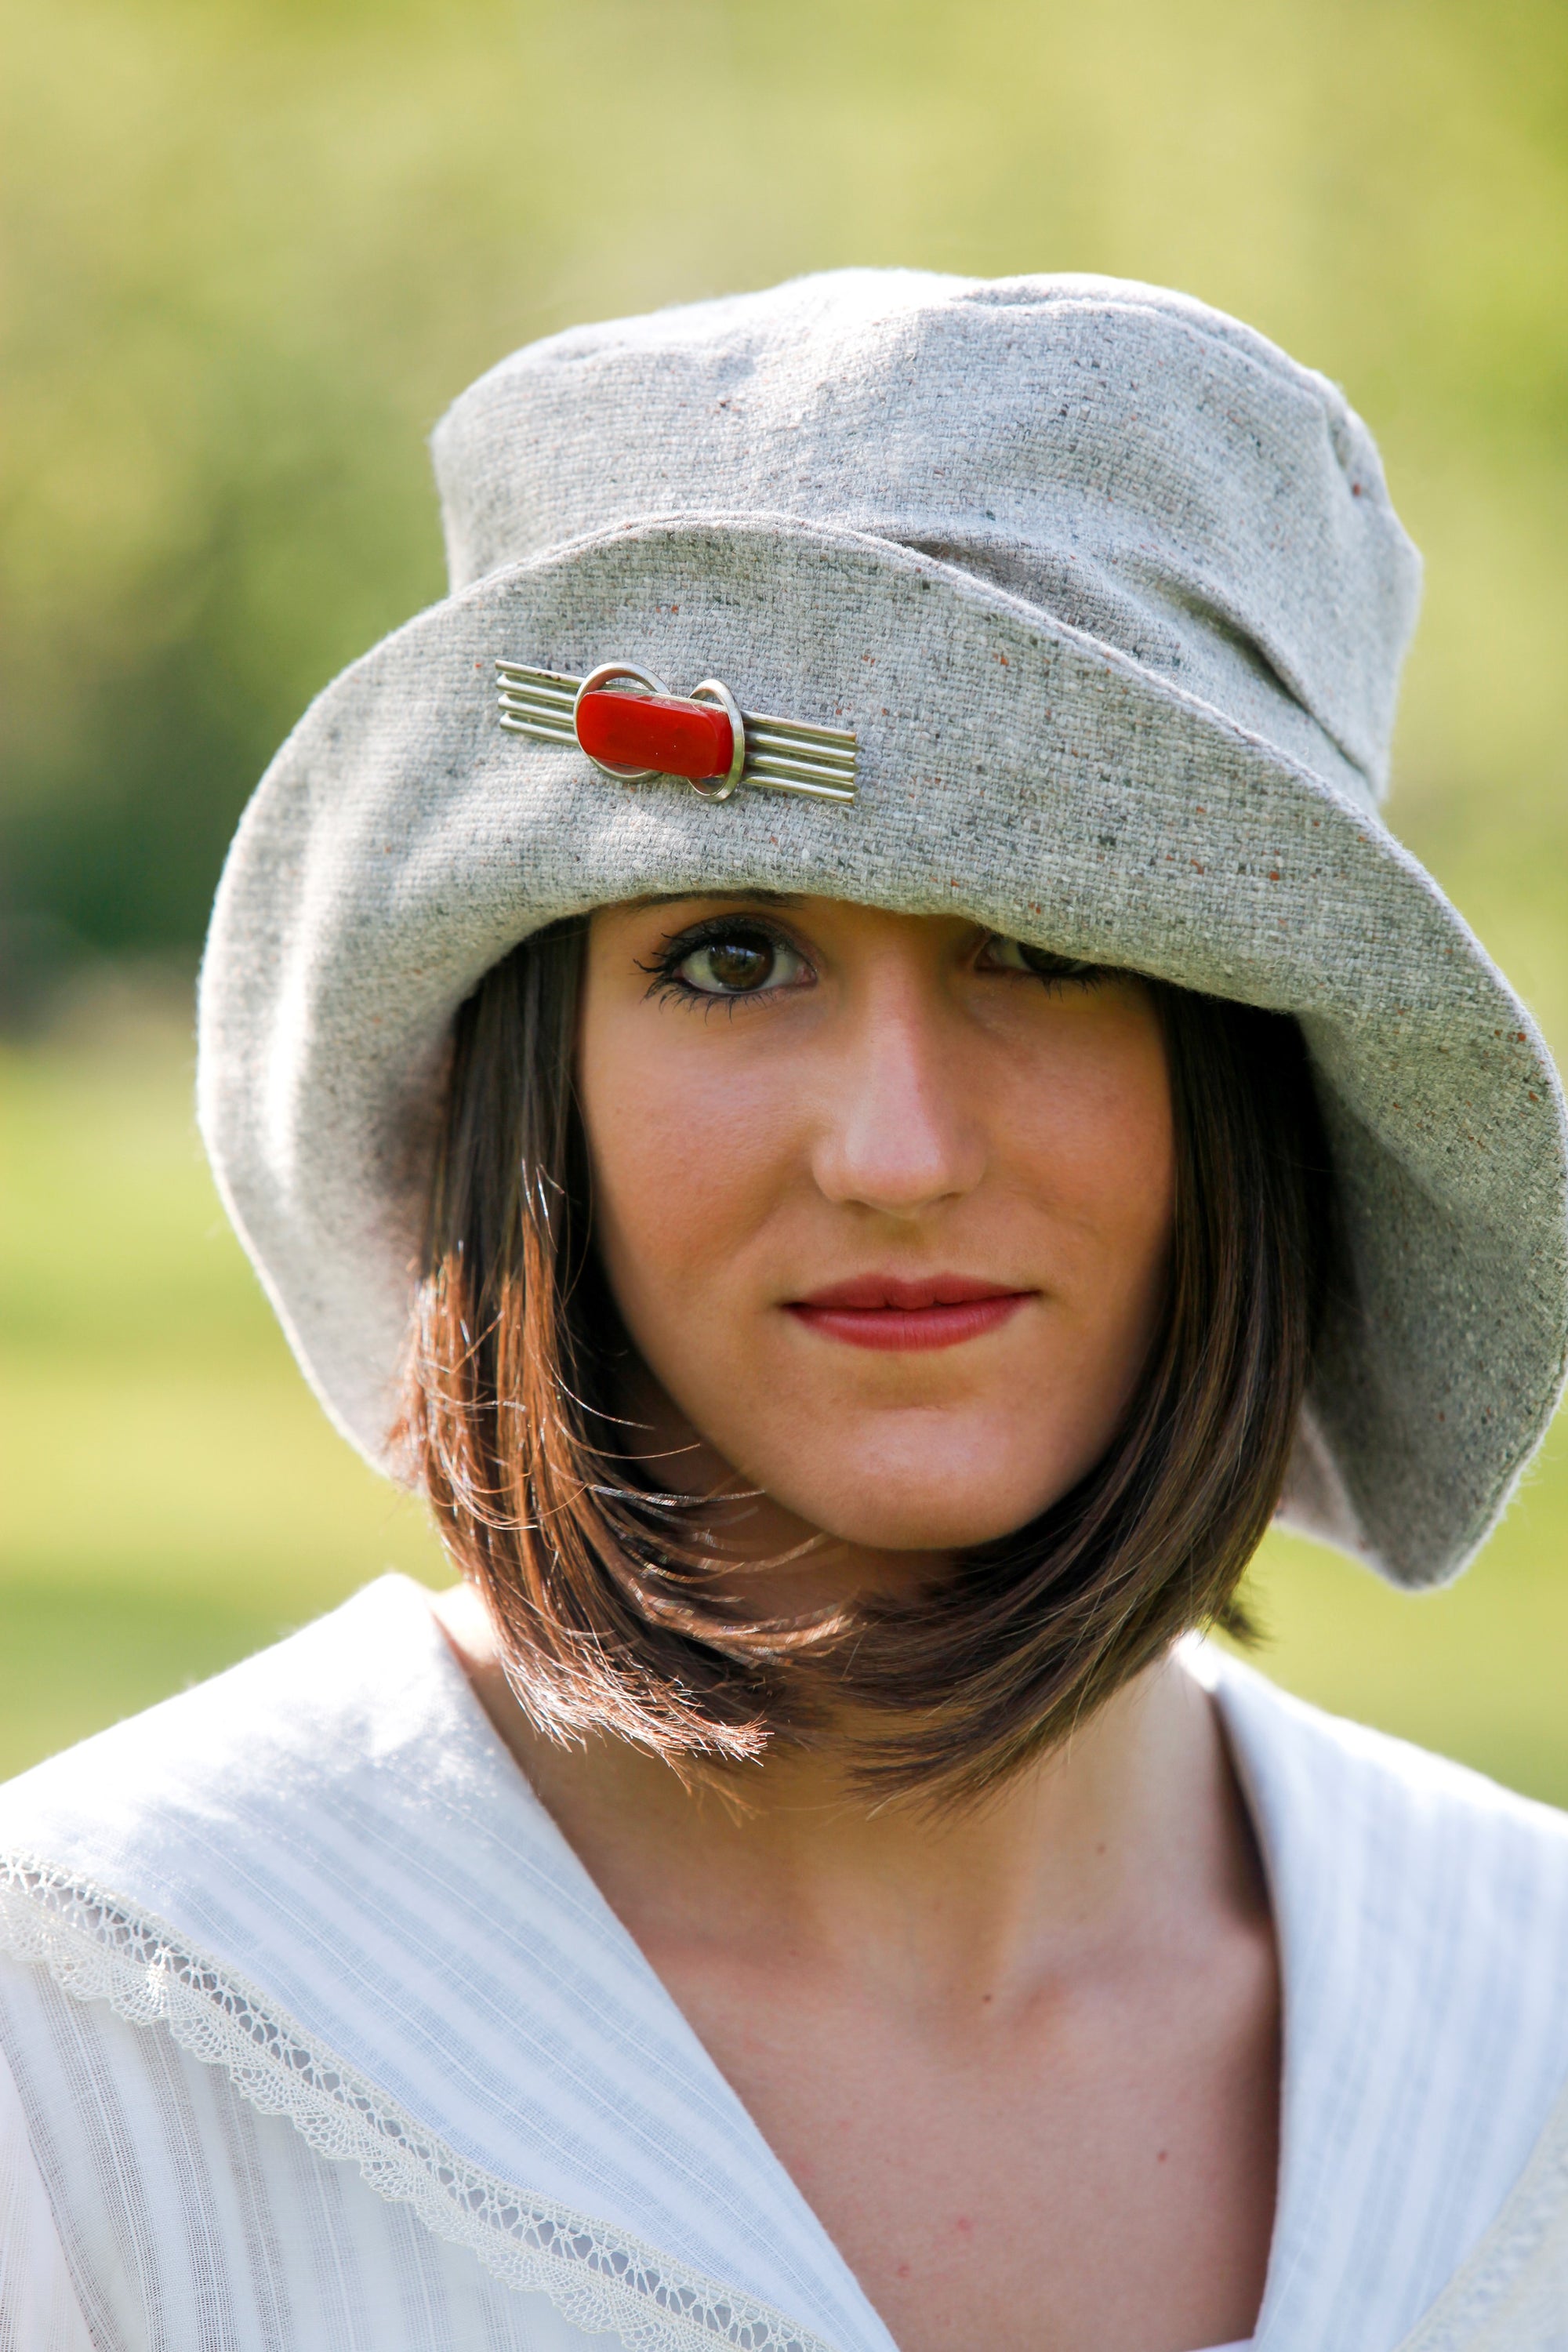 Young brunette white women wearing red lipstick. Wearing the #269 Metropolitan Hat in gray with a red brooch on the brim of the hat.